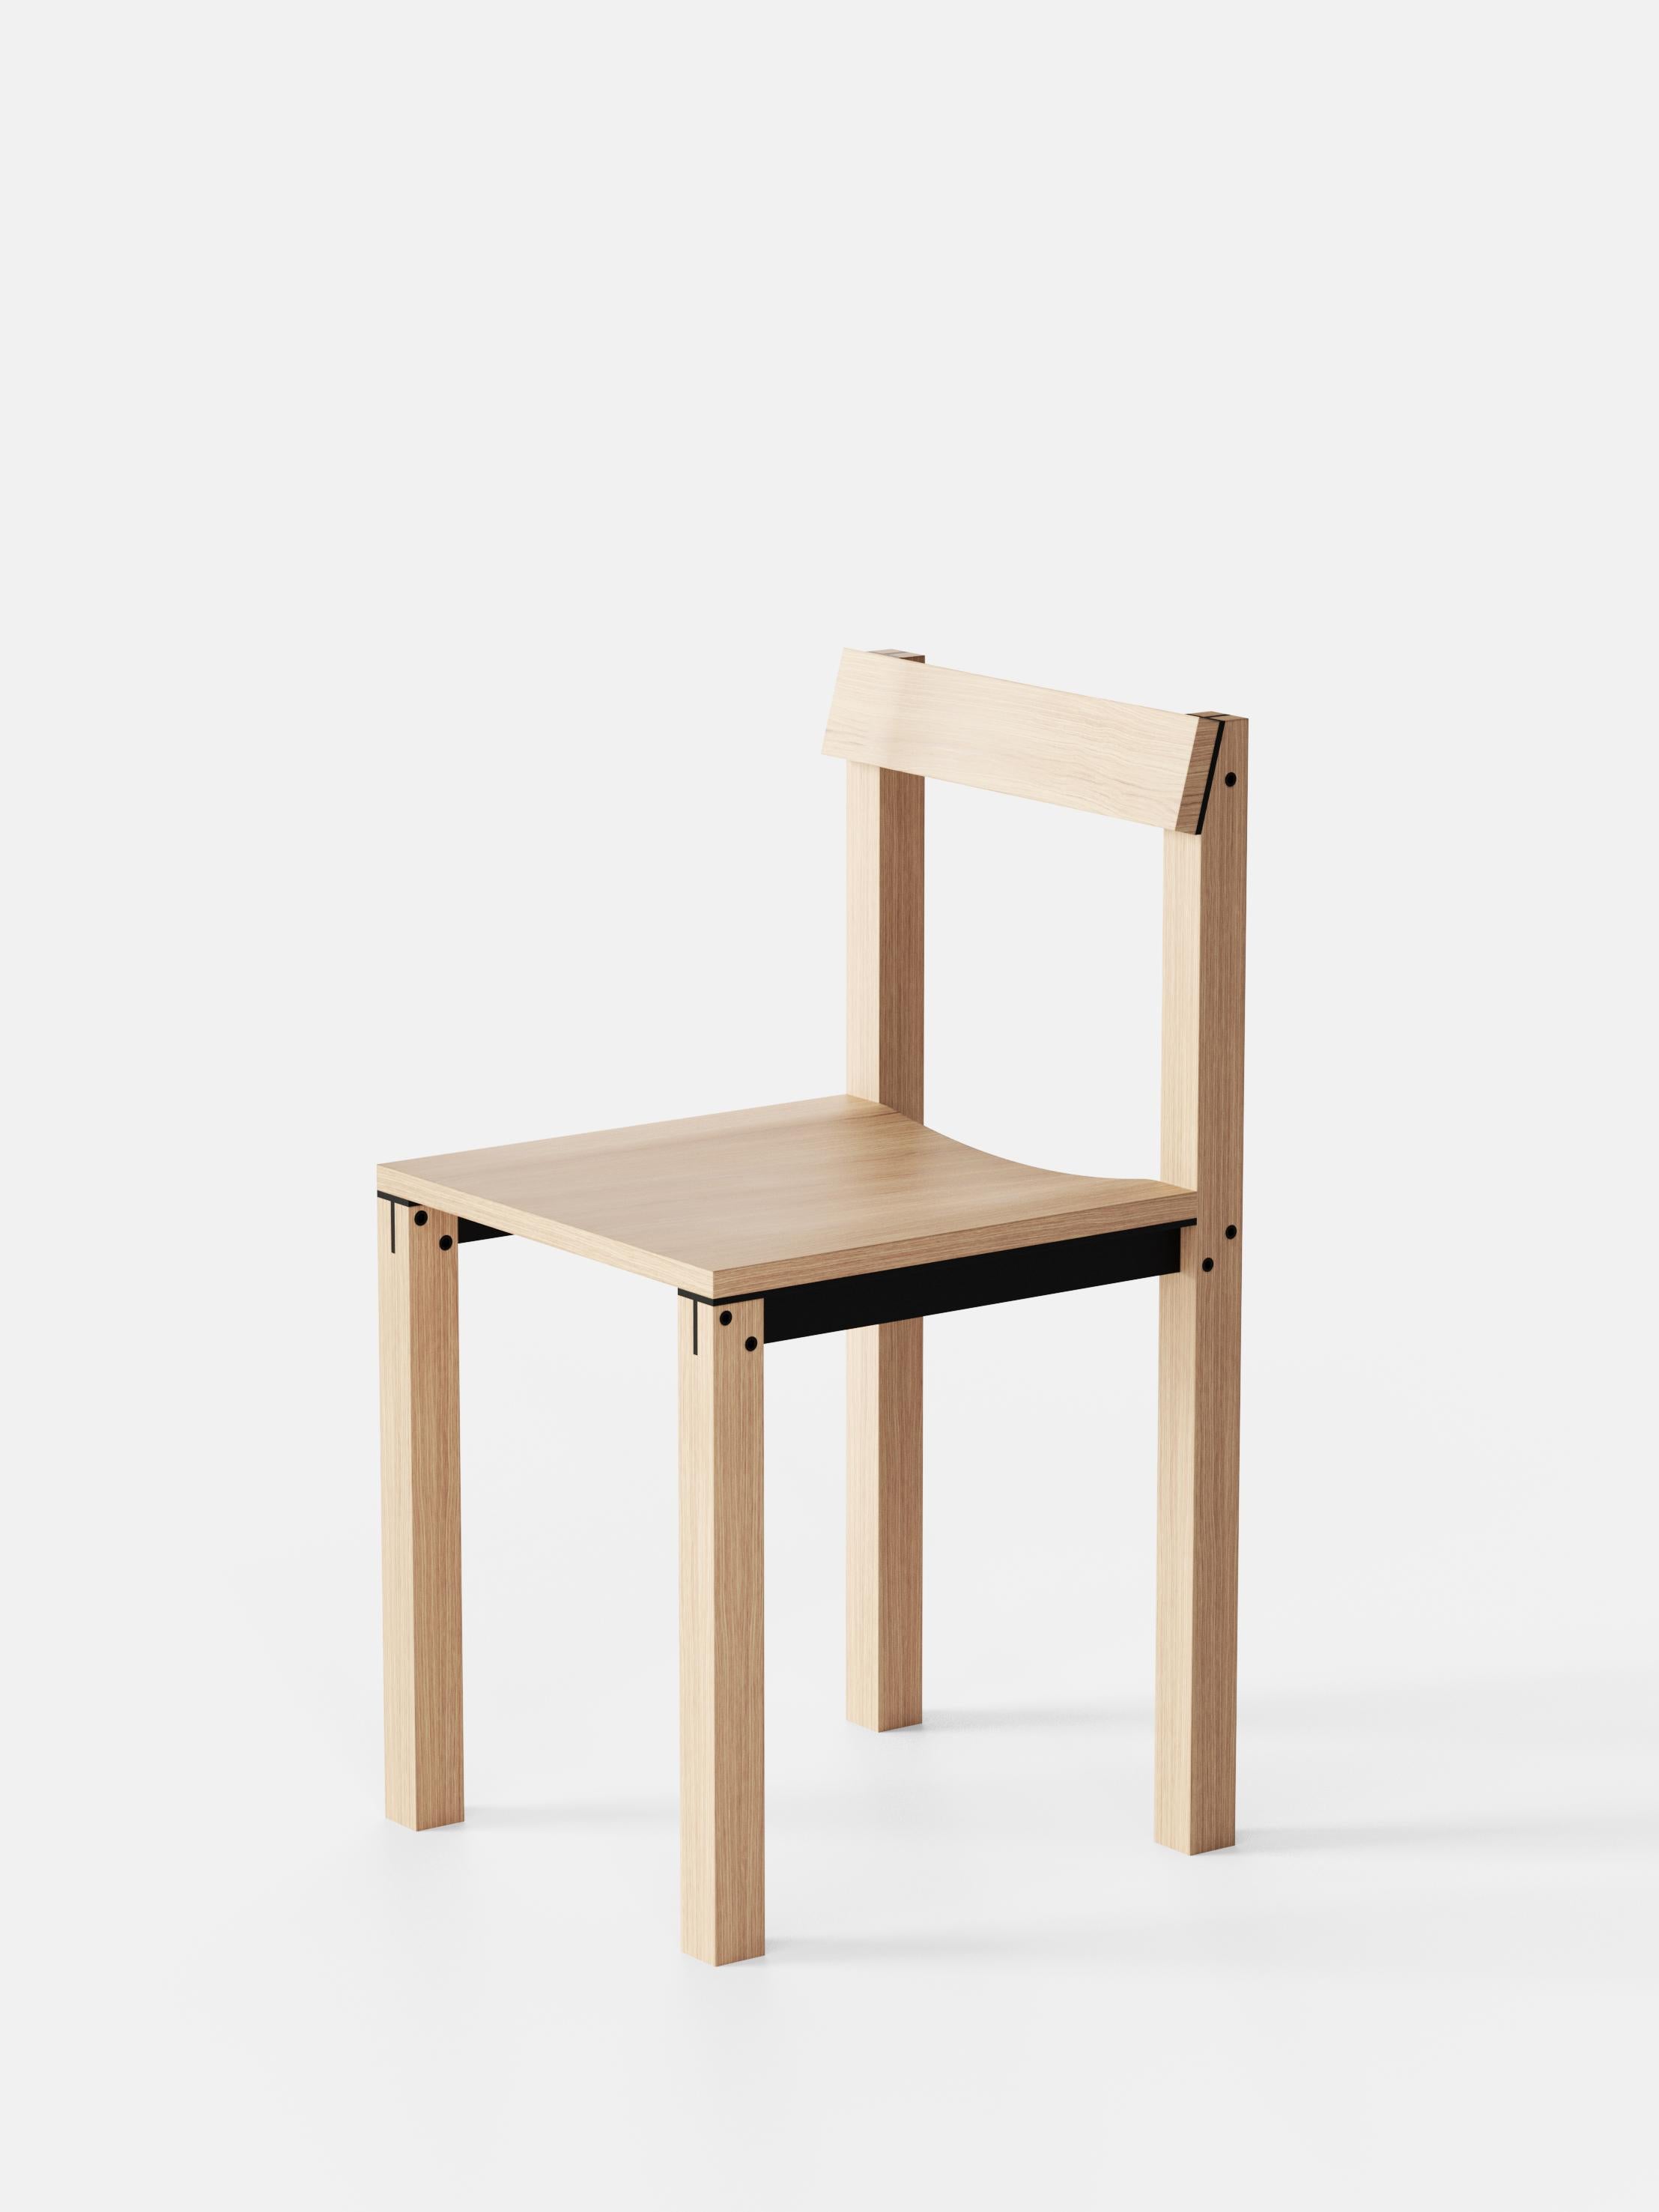 Set of 8 Tal Oak Chairs by Kann Design
Dimensions: D 40 x W 44 x H 80 cm.
Materials: Natural oak, aluminum.
Available in other finishes.

The Tal chair designed by Léonard Kadid is made of aluminium and wood.
The T aluminium profiles reinforce the